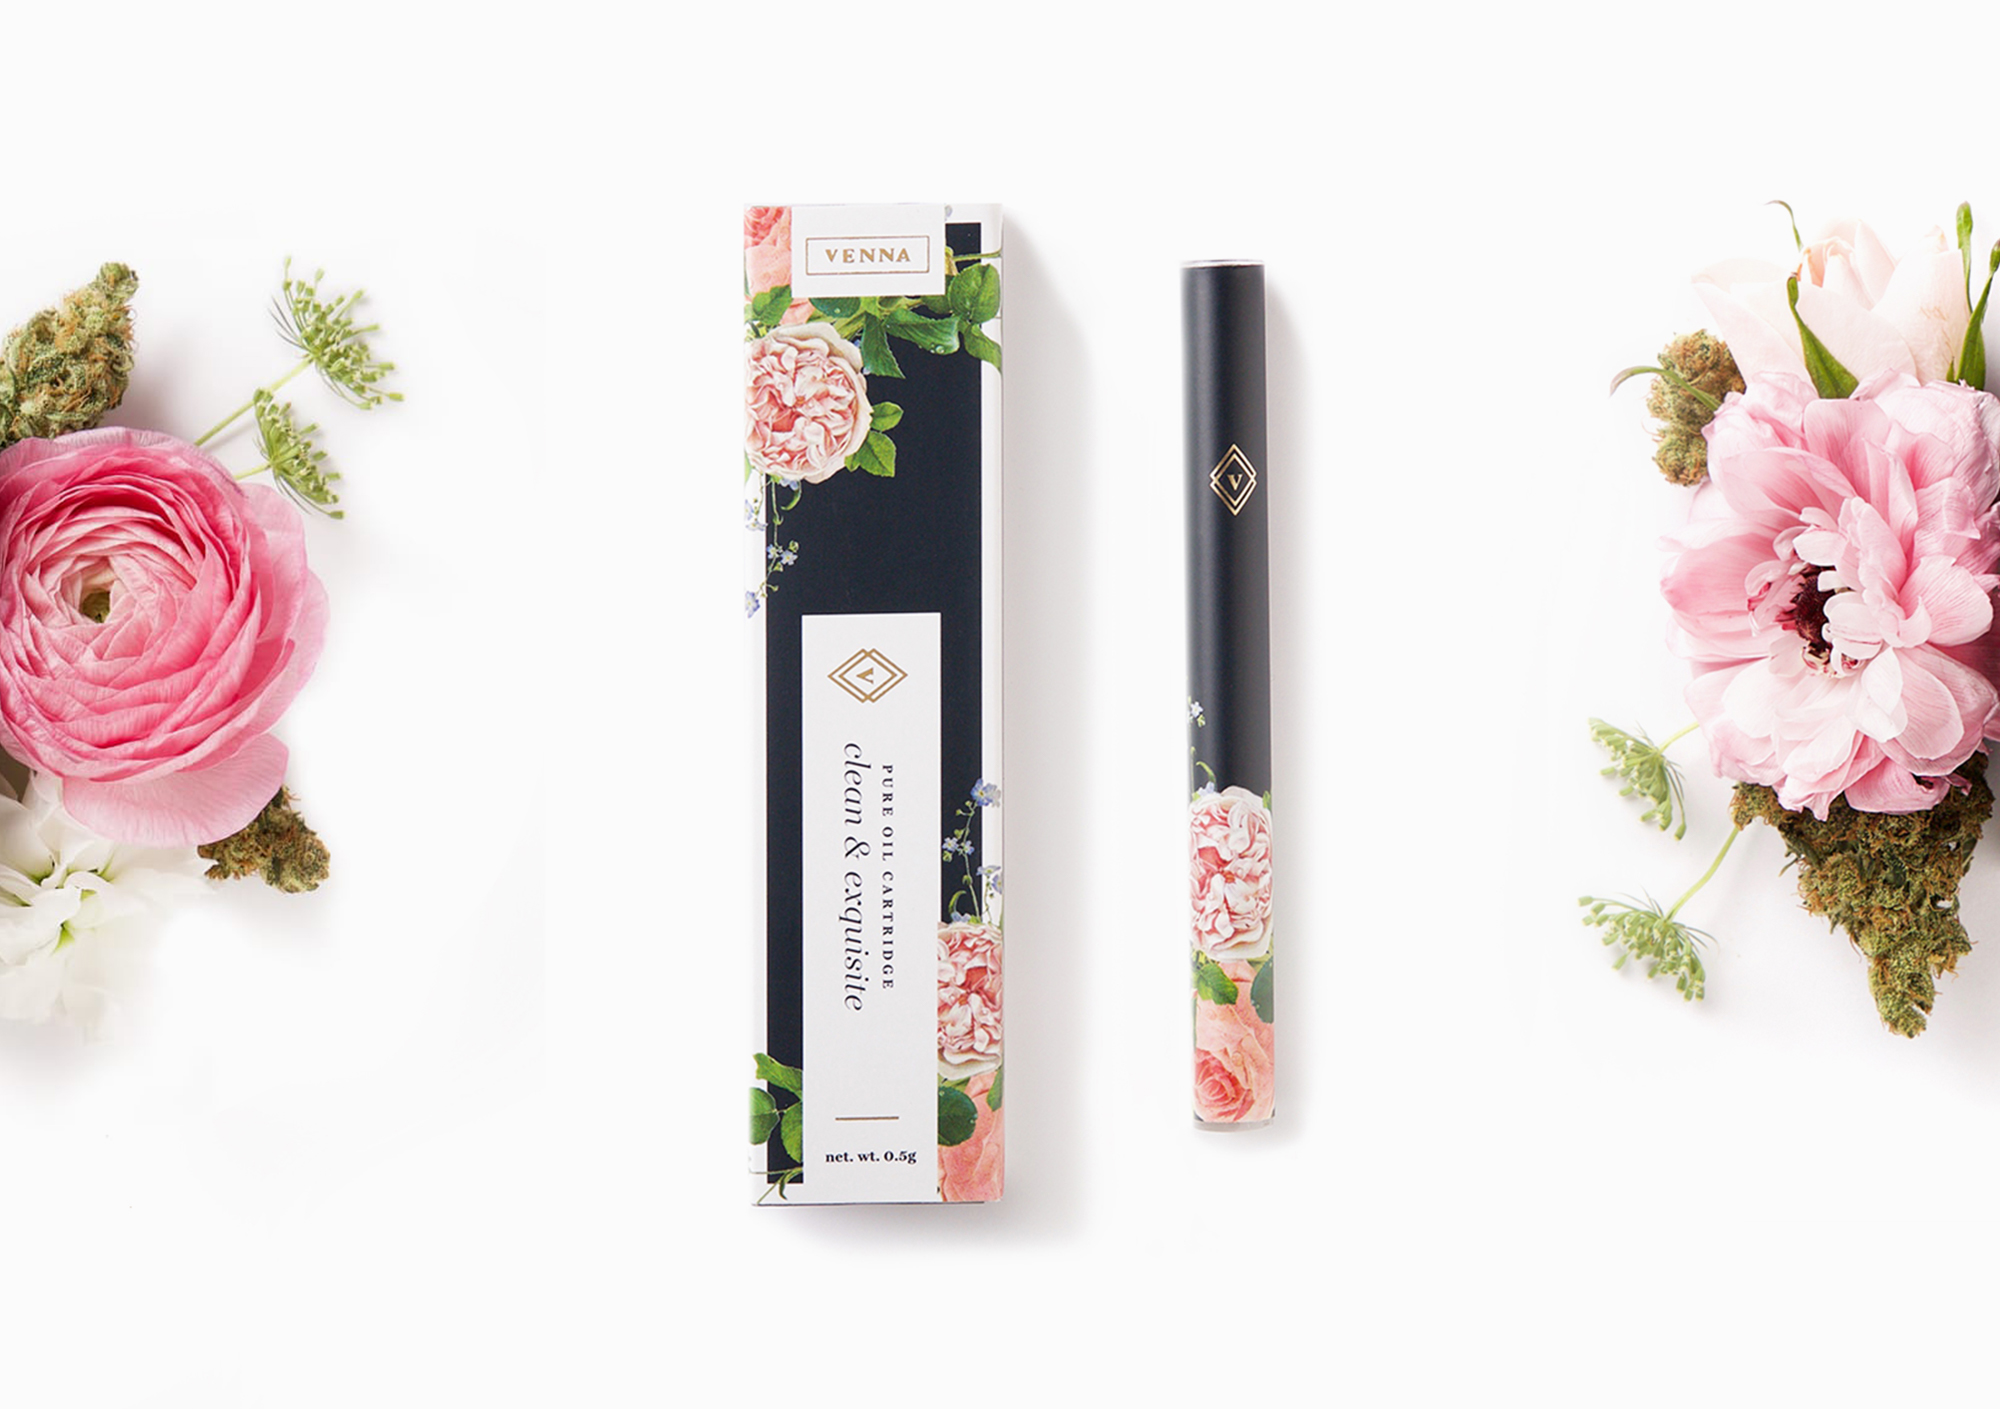 This Feminine Take on Cannabis Packaging Was Designed With Women in Mind